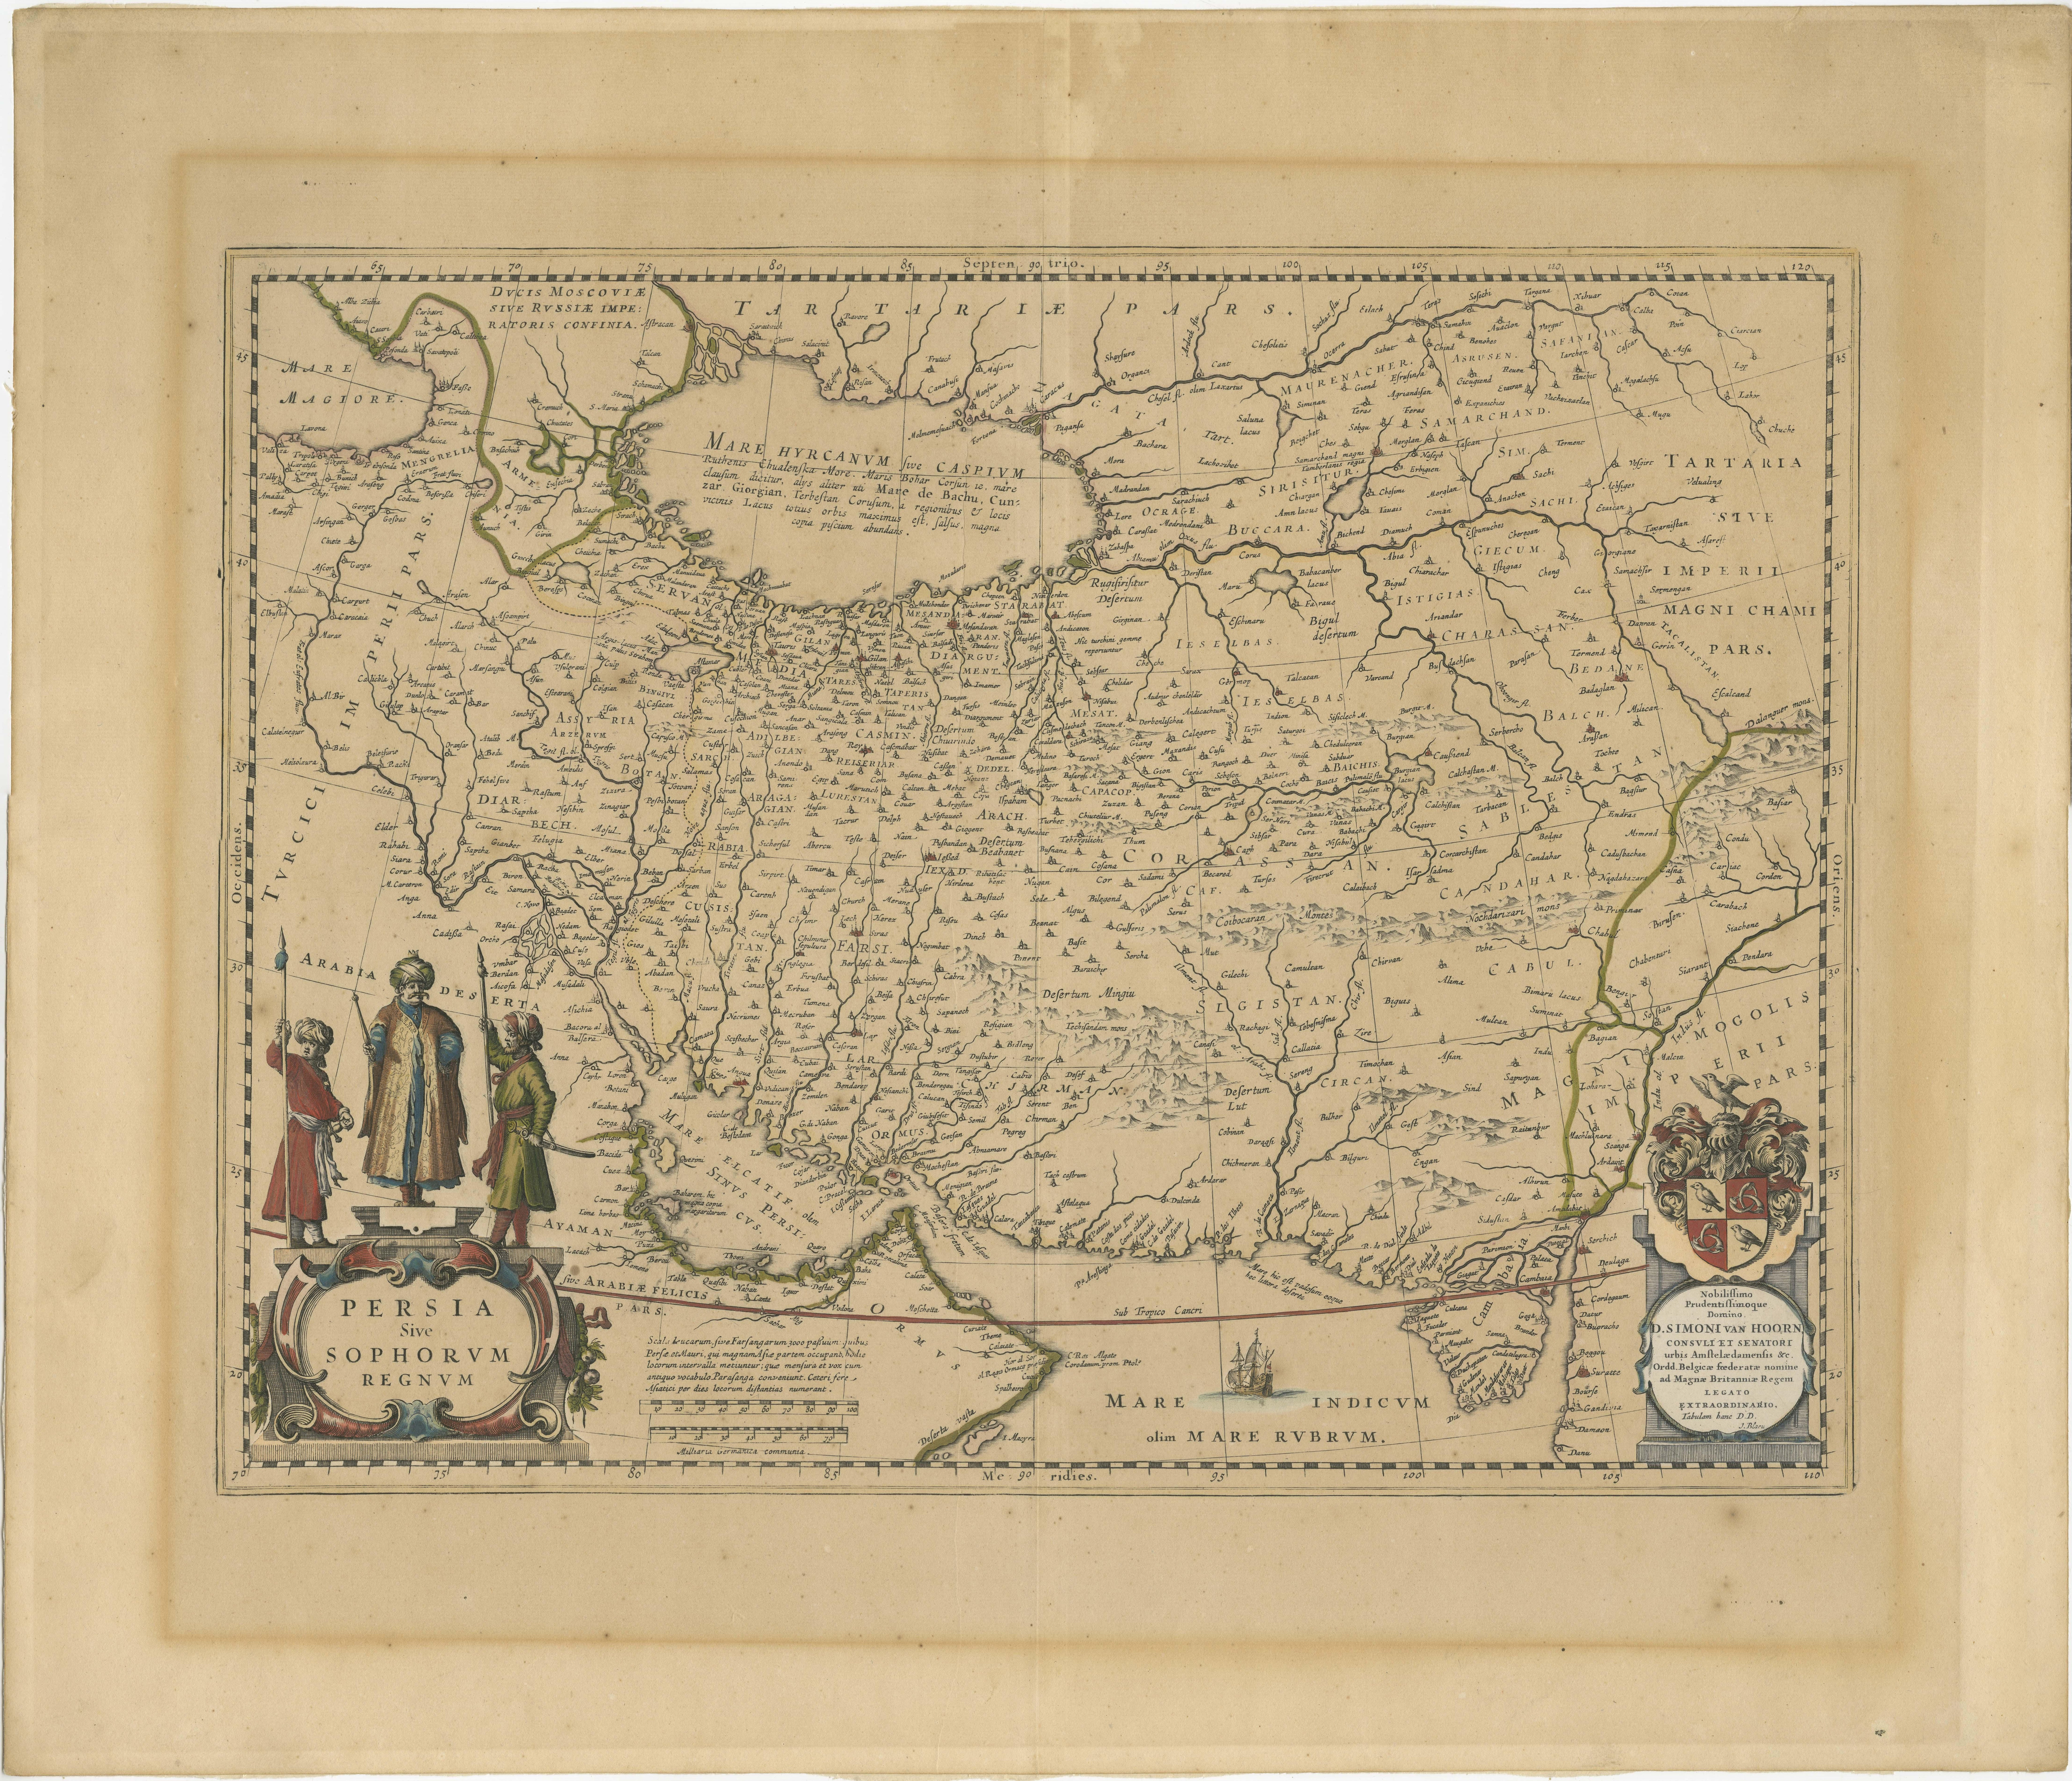 Antique map titled 'Persia sive Sophorum Regnum'. Original old map of Persia. The map extends from the Eastern Mediterranean to Tacalistan and the Indus River and the Dalanguer Mountains and the Cabul Region, with the Red Sea and the Persian Gulf in